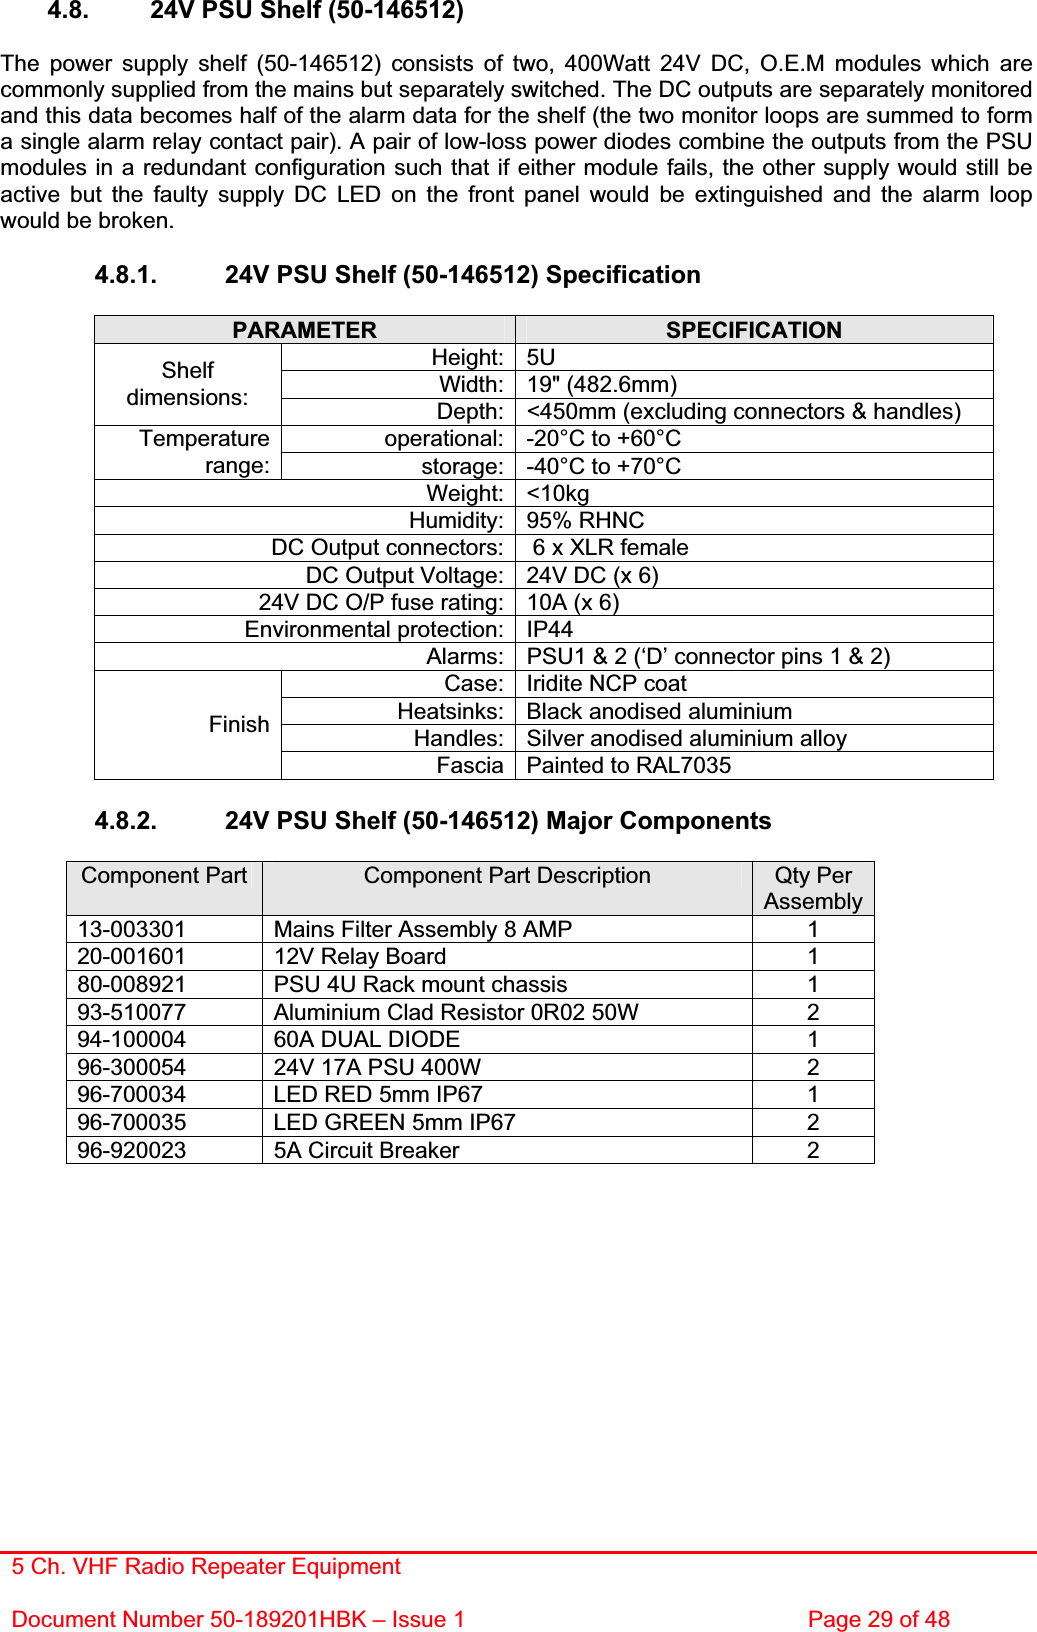 5 Ch. VHF Radio Repeater EquipmentDocument Number 50-189201HBK – Issue 1  Page 29 of 48 4.8.  24V PSU Shelf (50-146512) The power supply shelf (50-146512) consists of two, 400Watt 24V DC, O.E.M modules which are commonly supplied from the mains but separately switched. The DC outputs are separately monitored and this data becomes half of the alarm data for the shelf (the two monitor loops are summed to form a single alarm relay contact pair). A pair of low-loss power diodes combine the outputs from the PSU modules in a redundant configuration such that if either module fails, the other supply would still be active but the faulty supply DC LED on the front panel would be extinguished and the alarm loop would be broken. 4.8.1.  24V PSU Shelf (50-146512) Specification PARAMETER SPECIFICATIONHeight: 5U Width: 19&quot; (482.6mm) Shelfdimensions: Depth: &lt;450mm (excluding connectors &amp; handles) operational: -20°C to +60°C Temperaturerange: storage: -40°C to +70°C Weight: &lt;10kg Humidity: 95% RHNC DC Output connectors:  6 x XLR female DC Output Voltage: 24V DC (x 6) 24V DC O/P fuse rating: 10A (x 6) Environmental protection: IP44 Alarms: PSU1 &amp; 2 (‘D’ connector pins 1 &amp; 2) Case: Iridite NCP coat Heatsinks: Black anodised aluminium Handles: Silver anodised aluminium alloy FinishFascia Painted to RAL7035 4.8.2.  24V PSU Shelf (50-146512) Major Components Component Part  Component Part Description  Qty Per Assembly 13-003301  Mains Filter Assembly 8 AMP   1 20-001601  12V Relay Board  1 80-008921  PSU 4U Rack mount chassis  1 93-510077  Aluminium Clad Resistor 0R02 50W  2 94-100004  60A DUAL DIODE  1 96-300054  24V 17A PSU 400W   2 96-700034  LED RED 5mm IP67   1 96-700035  LED GREEN 5mm IP67   2 96-920023  5A Circuit Breaker   2 